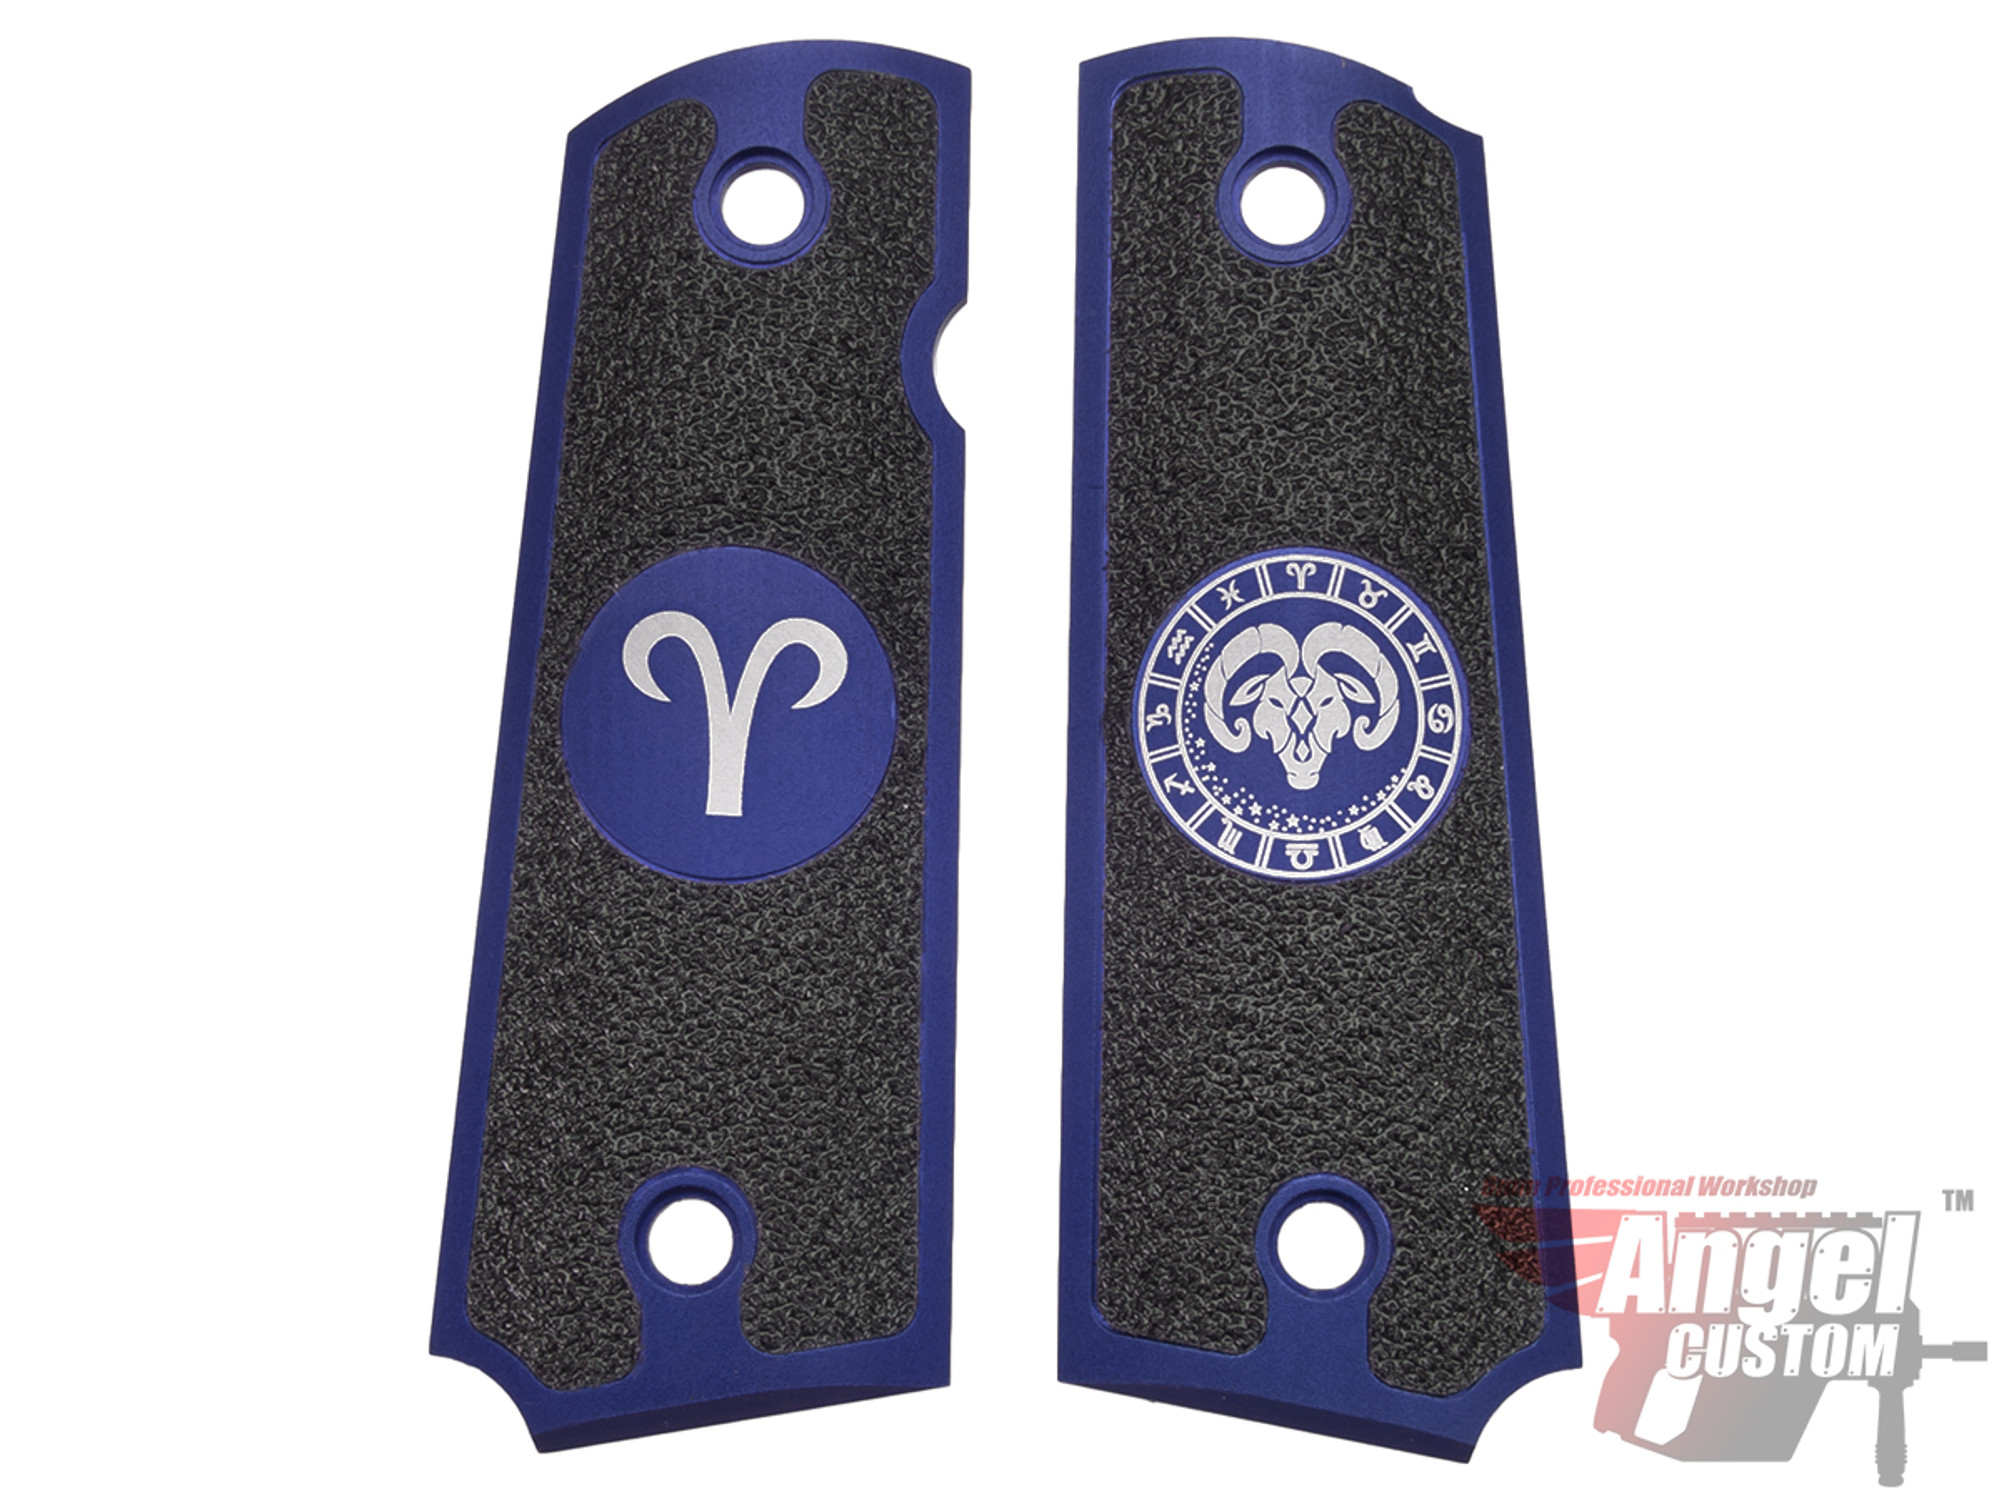 Angel Custom CNC Machined Tac-Glove "Zodiac" Grips for WE-Tech 1911 Series Airsoft Pistols - Navy Blue (Sign: Aries)